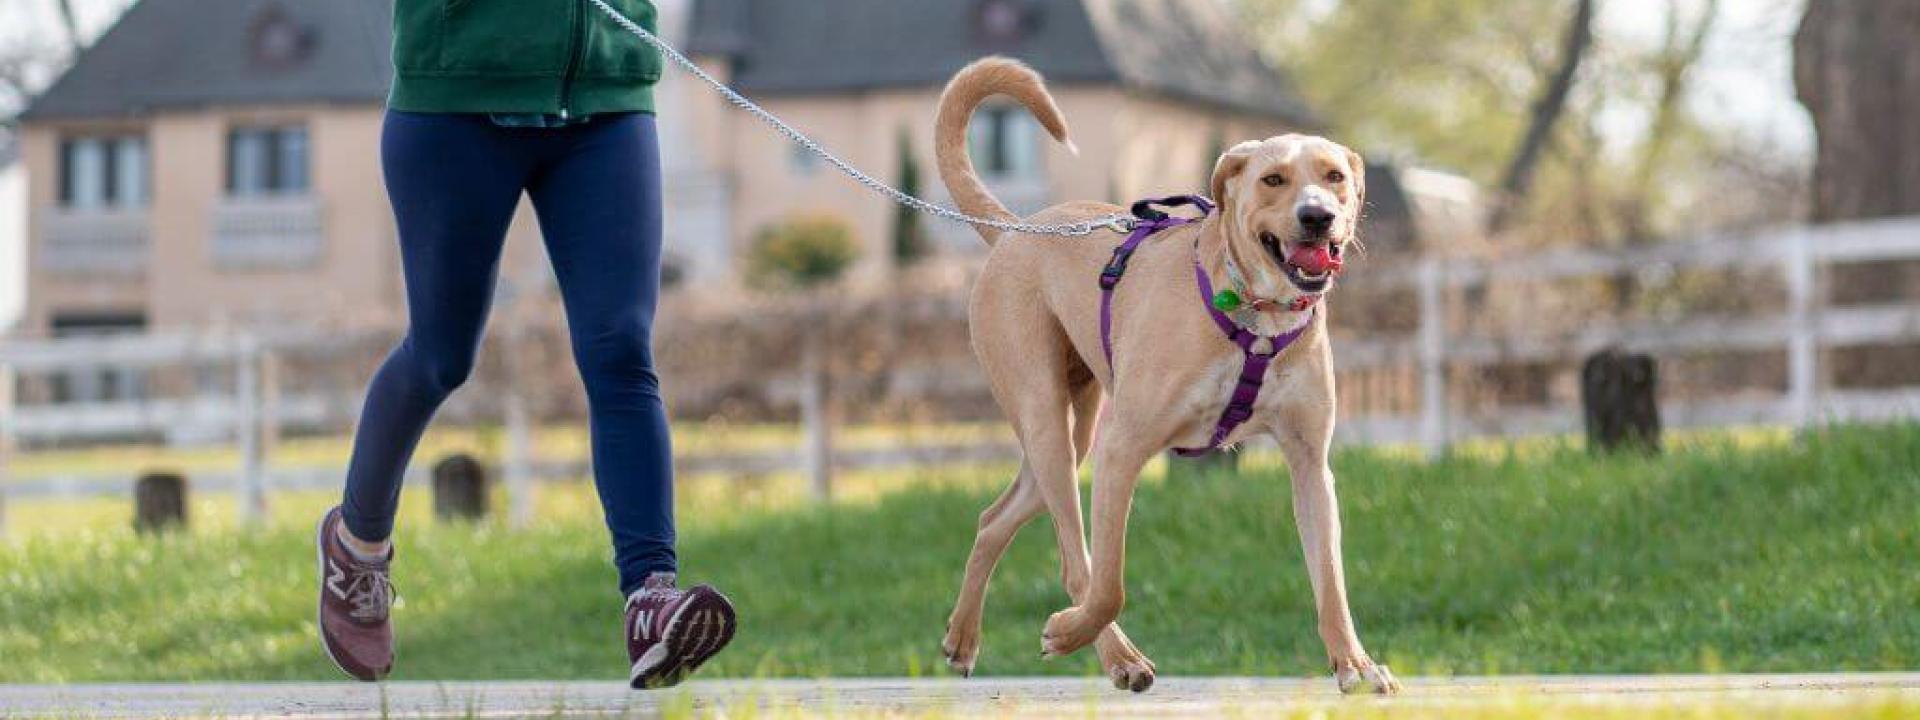 A dog in a leash and harness on a walk with its owner.